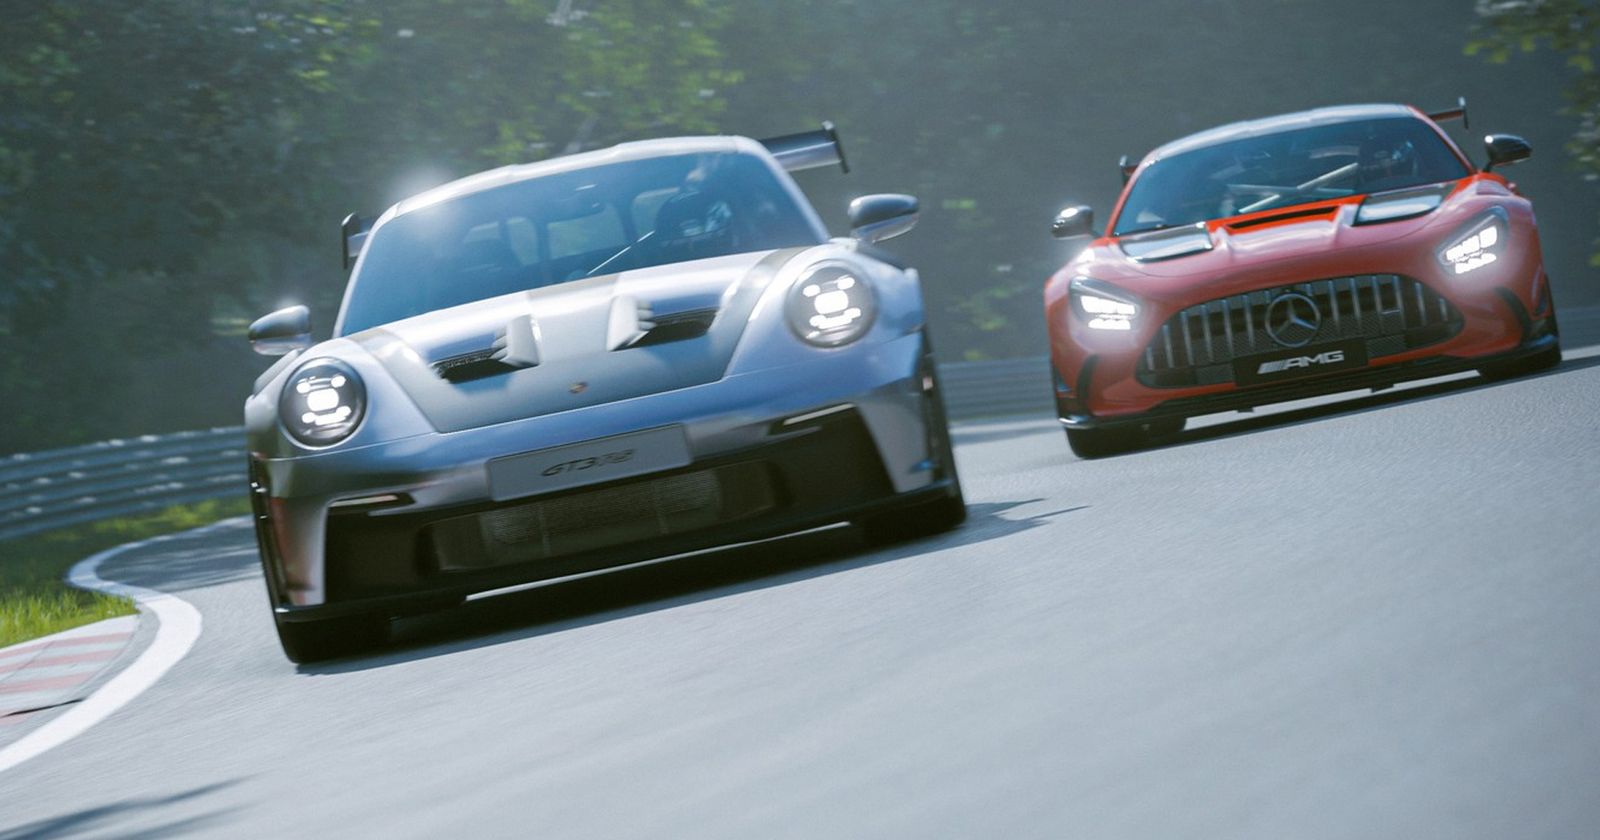 New Gran Turismo 7 Update Begins To Fix Credits And Rewards Issues - Game  Informer